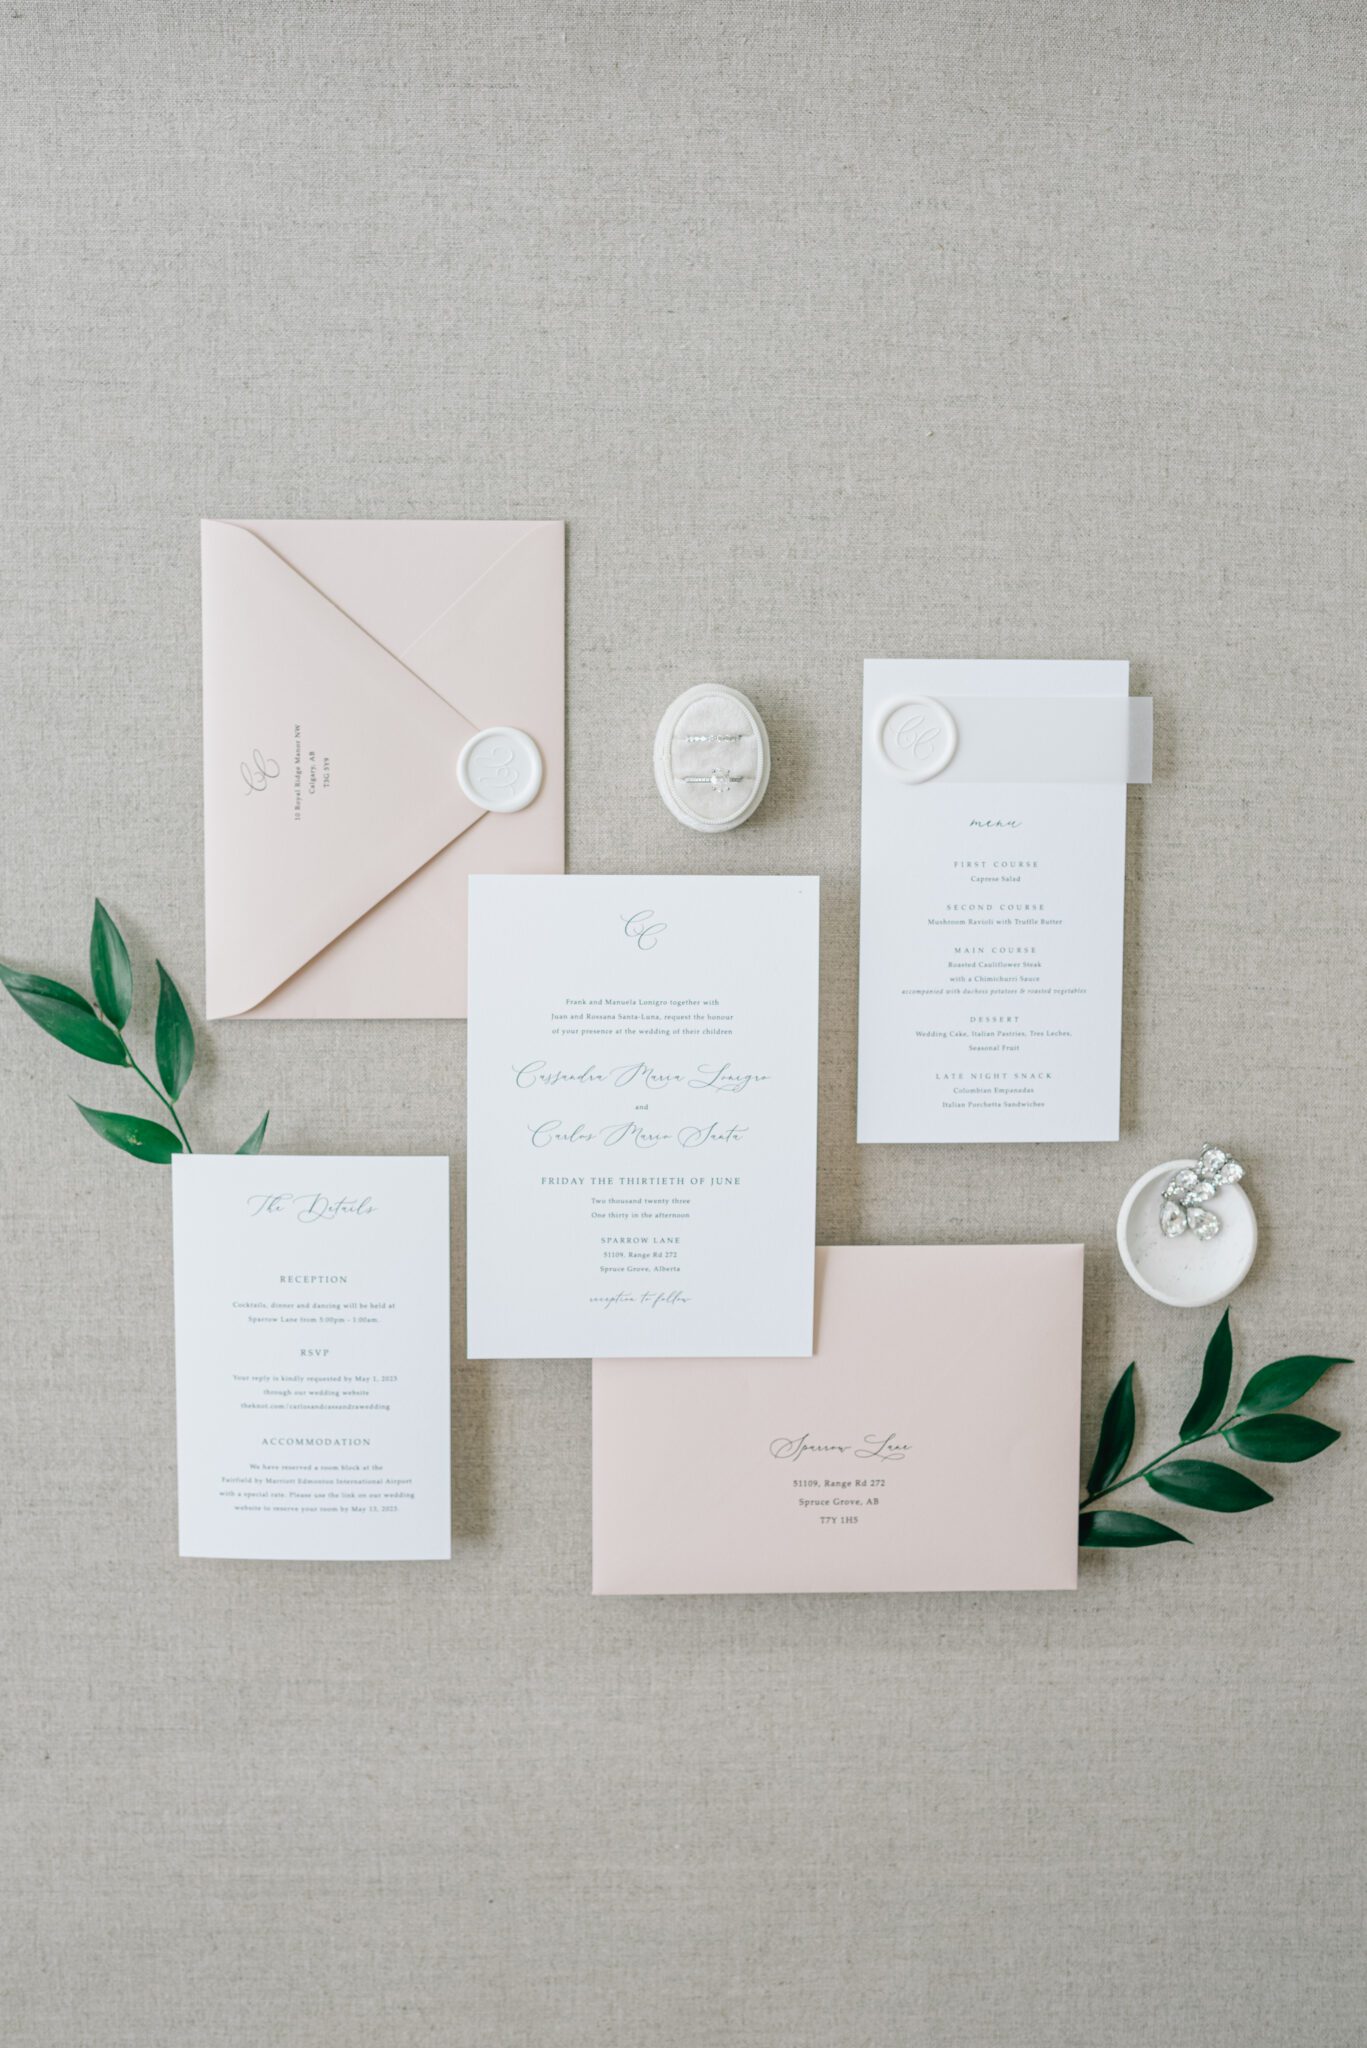 Classic and elegant white and blush wedding invitation paper suite captured by Jenny Jean Photography.
